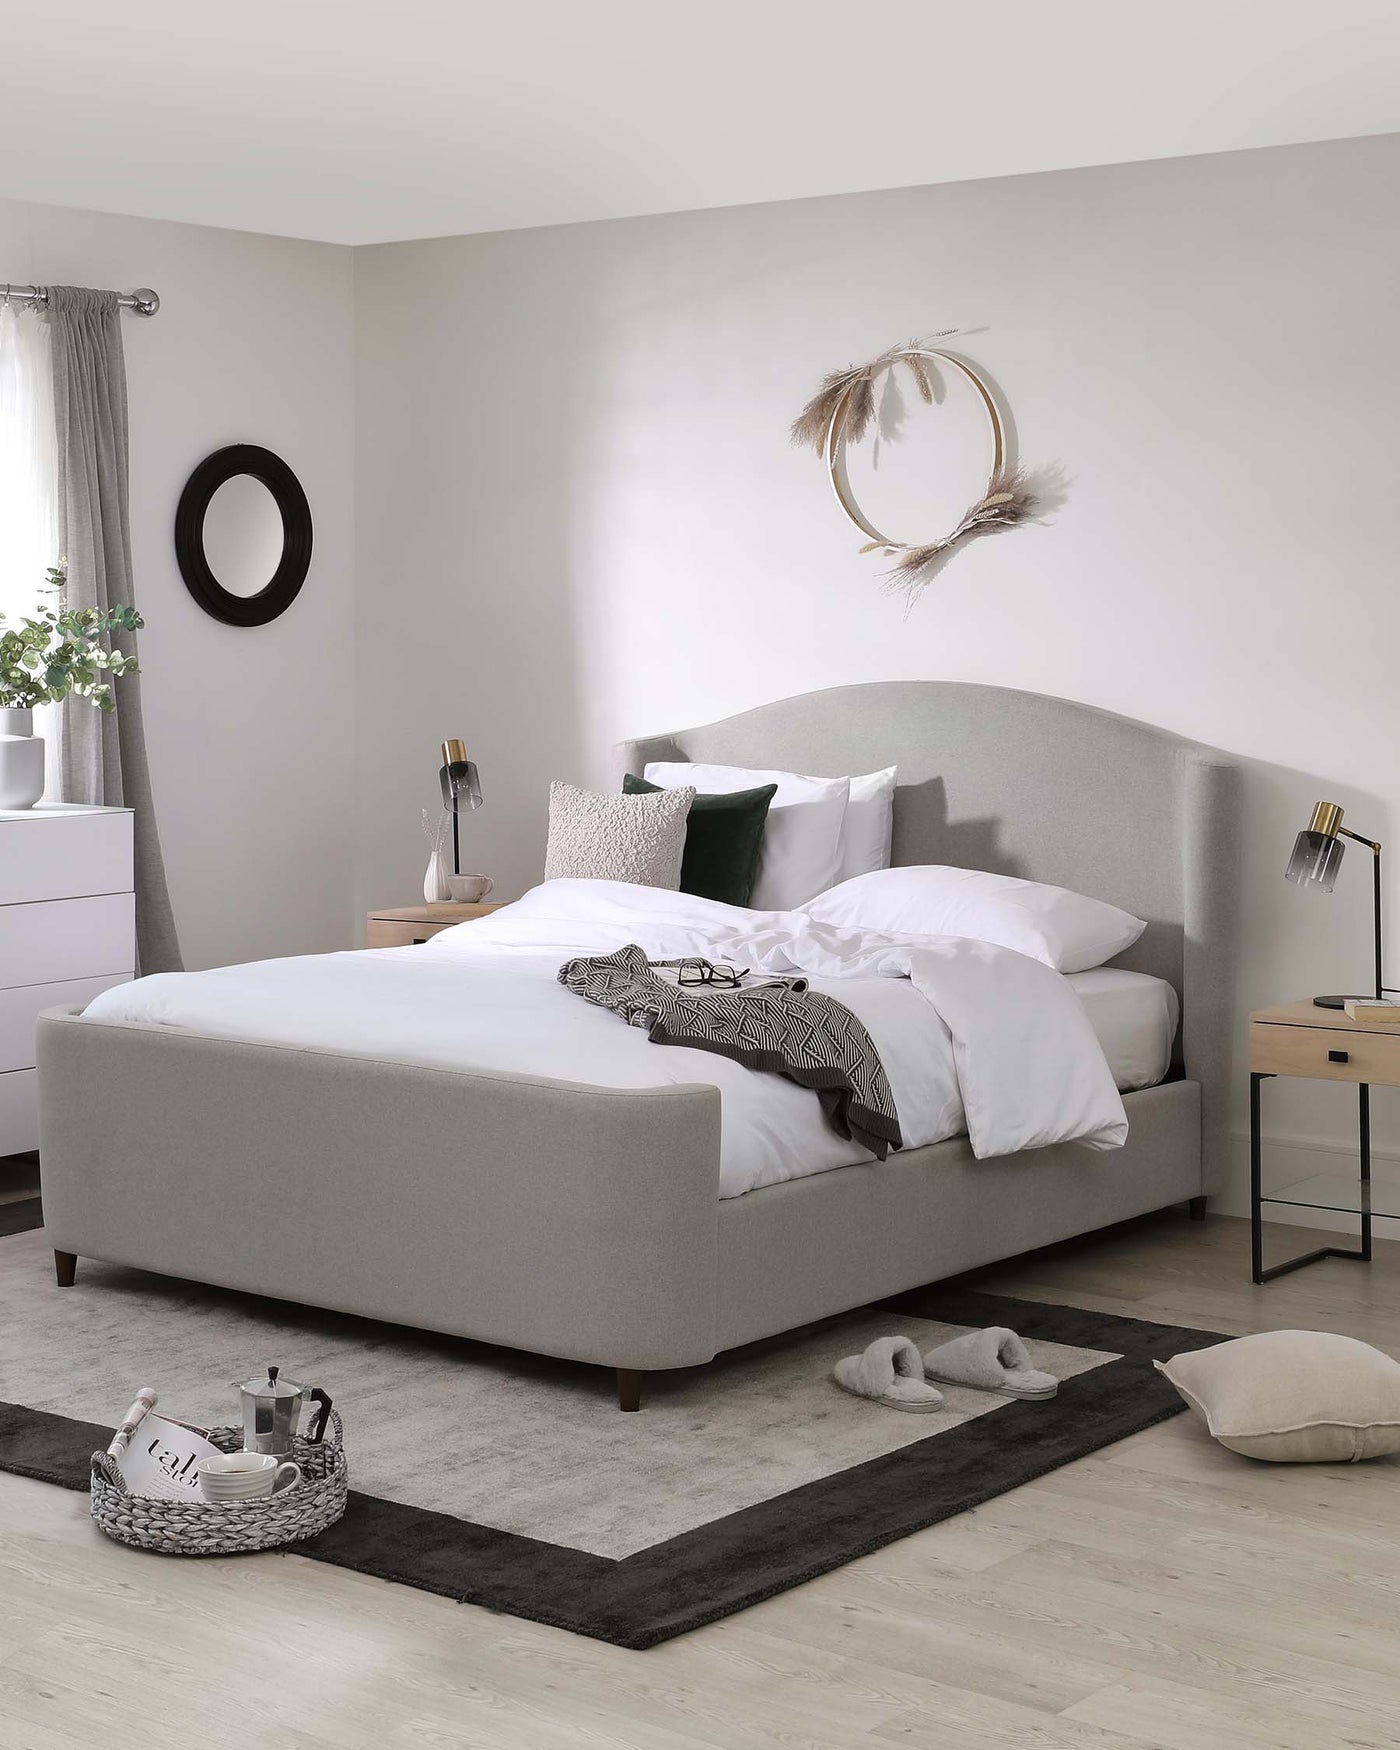 Modern bedroom furniture including a streamlined upholstered bed with a curved headboard in a light grey fabric, matching bedside tables with a simple, clean design, and a minimalist white dresser with sleek lines and white surface.